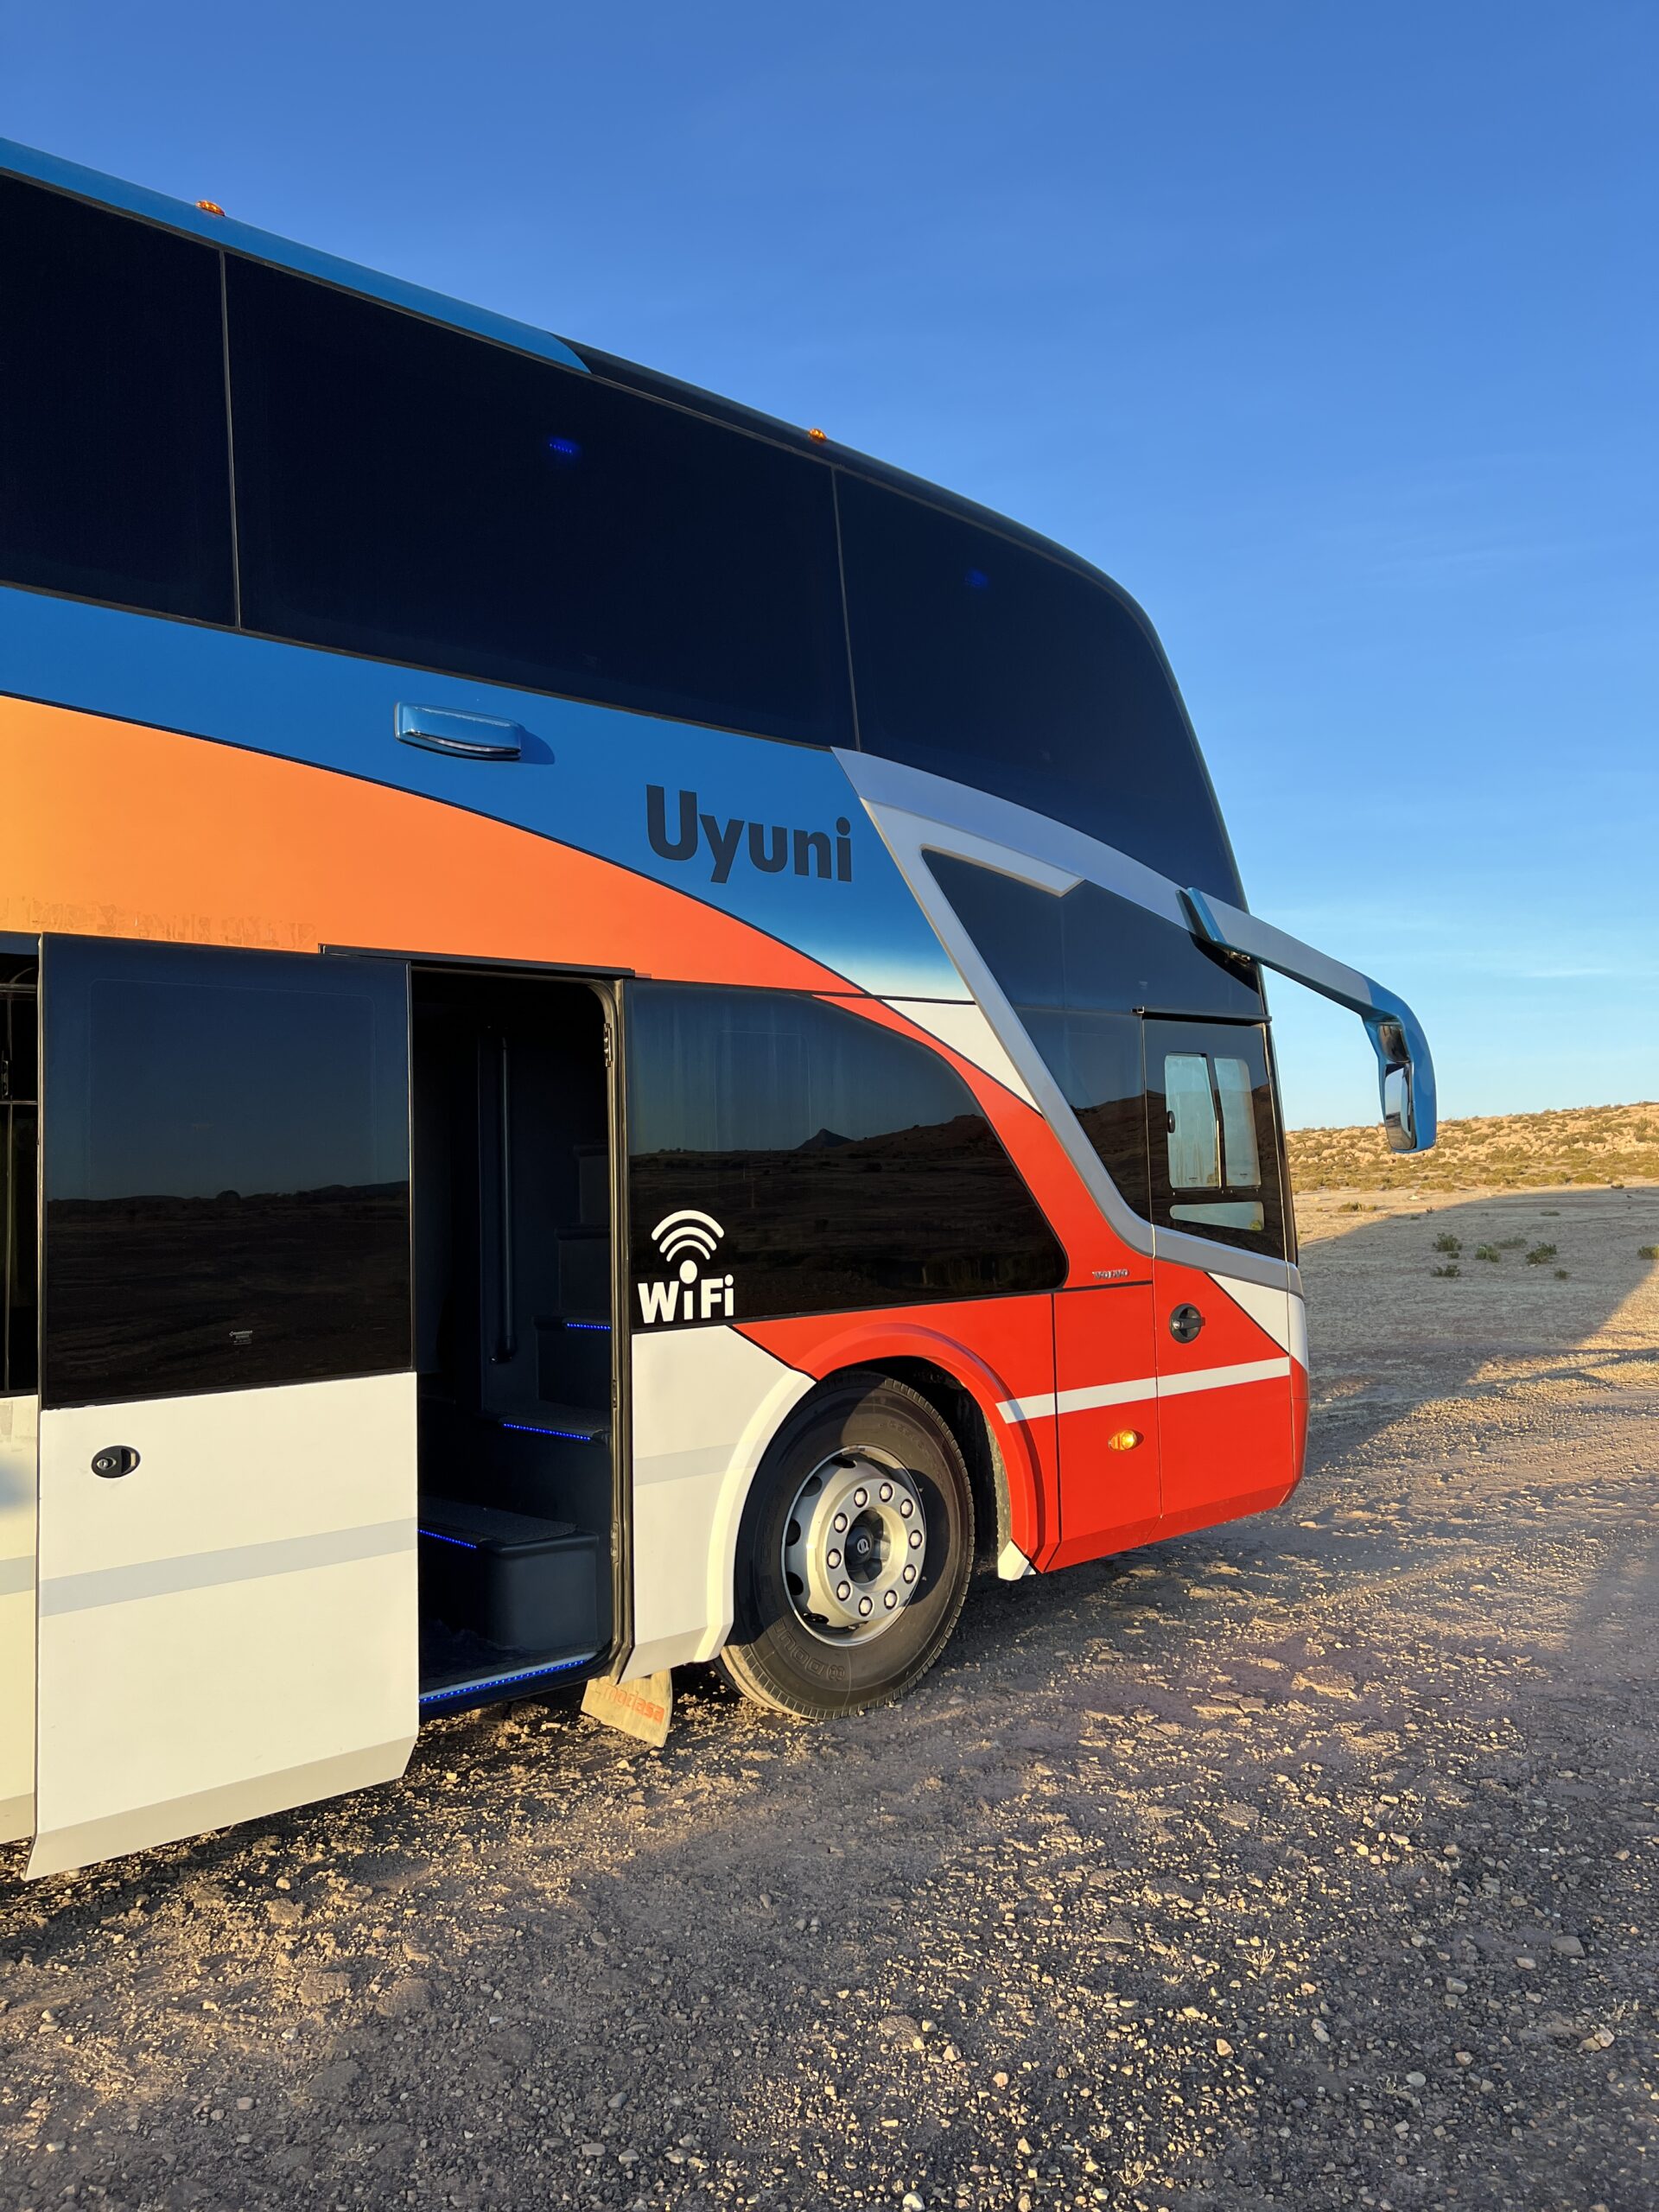 Travelling to Uyuni by bus